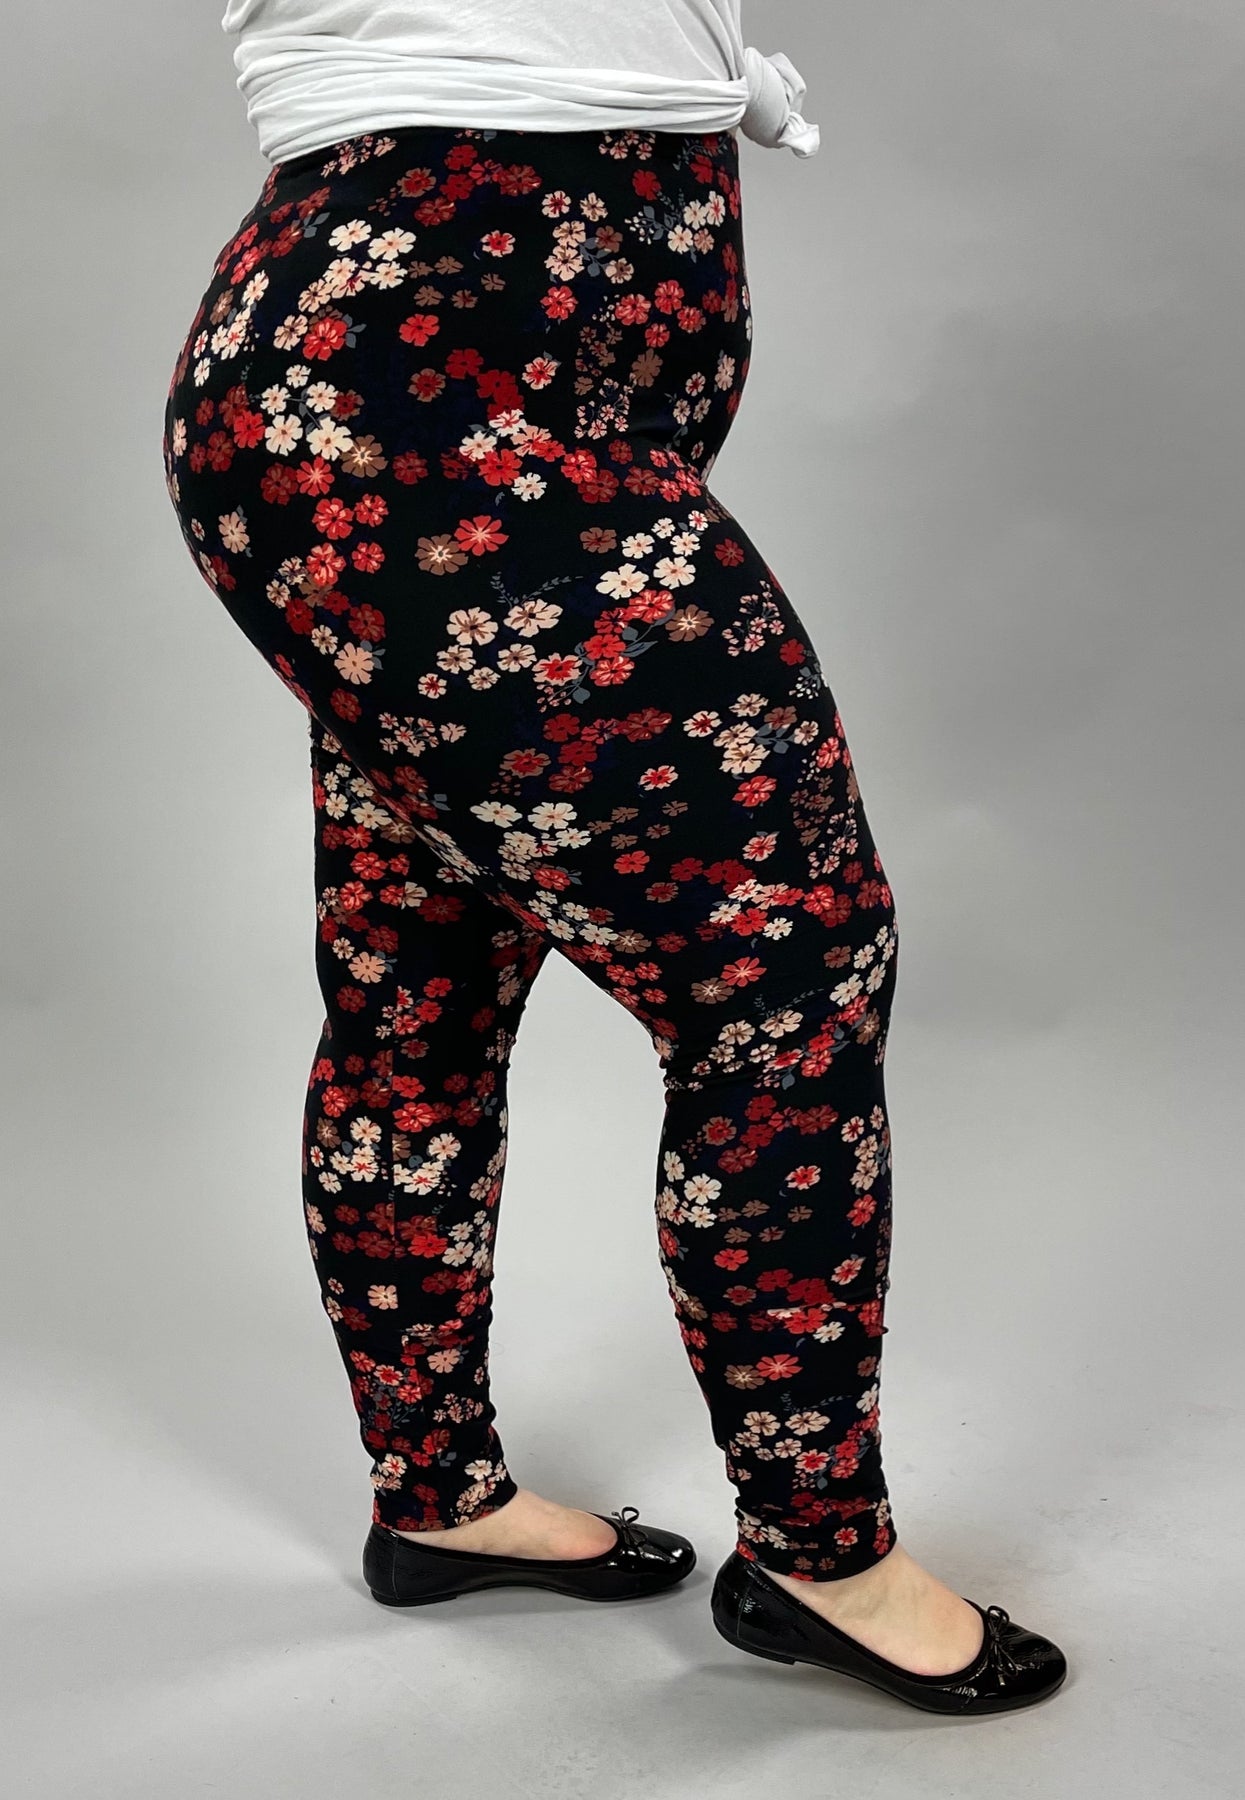 Floral Leggings - Free Shipping - Projects817 Llc - Projects817 LLC